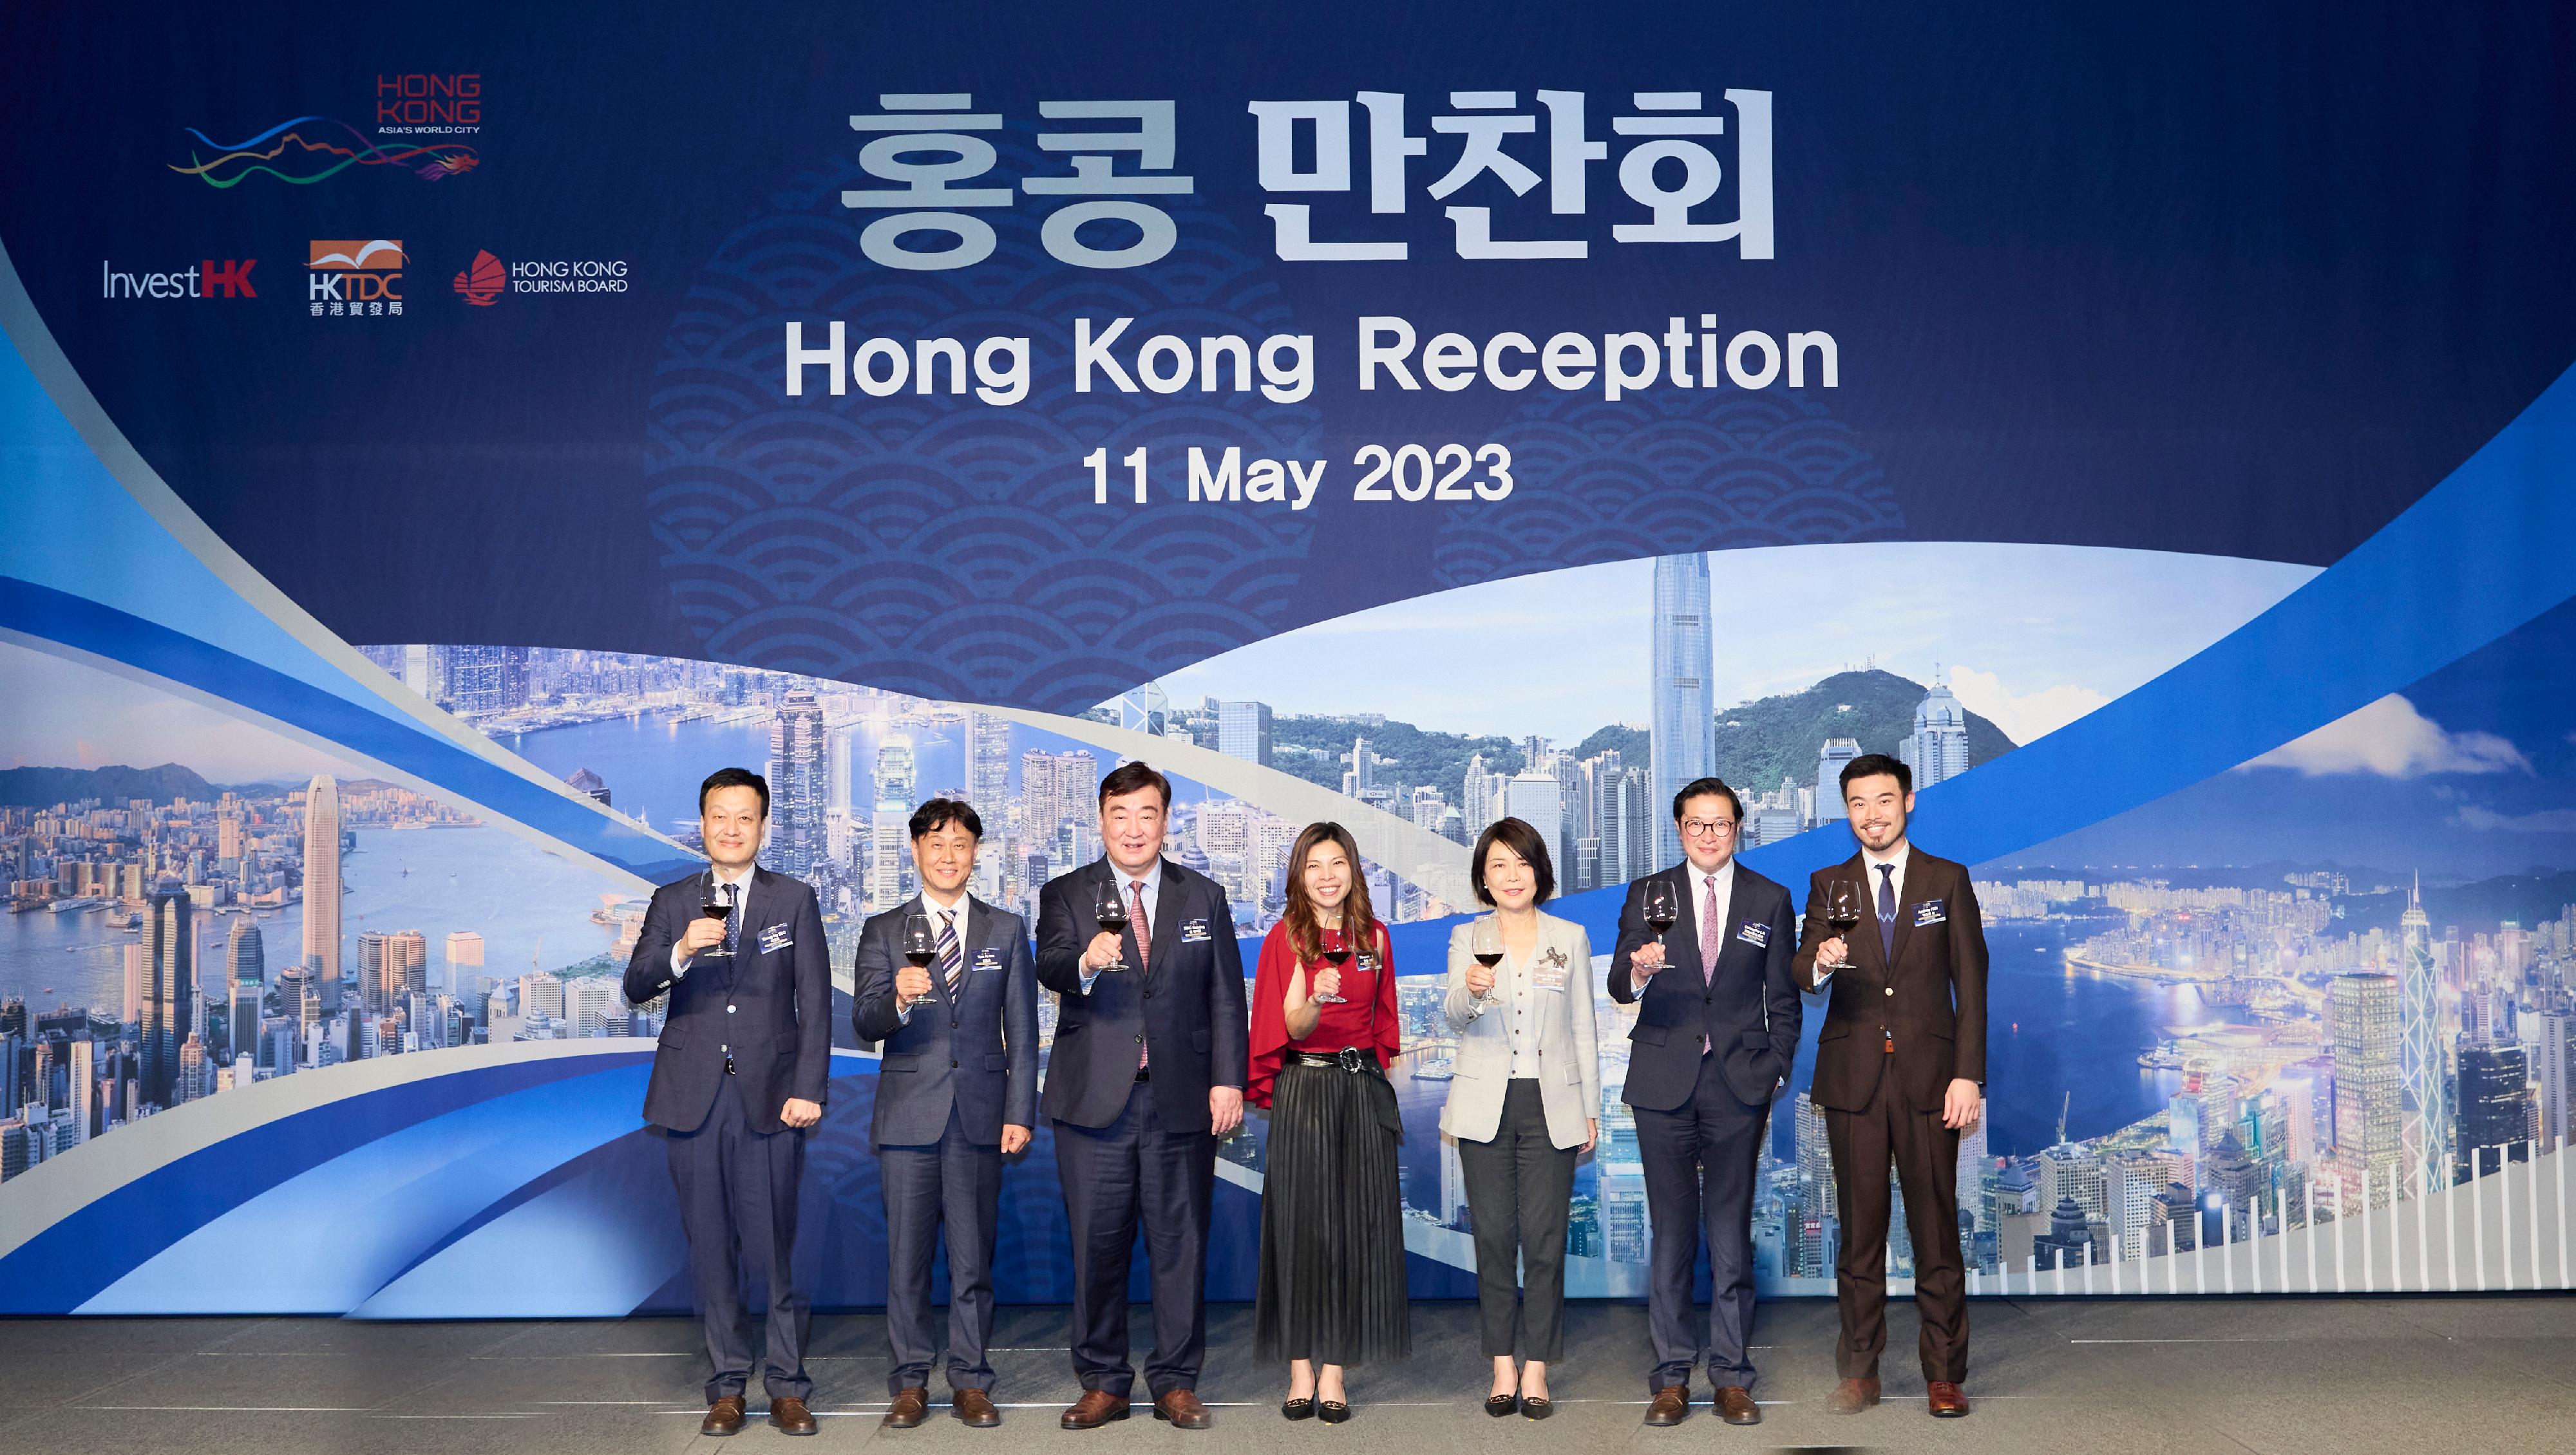 The Hong Kong Economic and Trade Office (Tokyo) held a reception in Seoul, Korea, today (May 11). Photo shows (from left) the Principal Consultant (Seoul) of Invest Hong Kong, Mr Seo Young-ho; the Regional Director of Korea of the Hong Kong Tourism Board, Mr Kim Yoon-ho; the Chinese Ambassador to the Republic of Korea, Mr Xing Haiming; the Principal Hong Kong Economic and Trade Representative (Tokyo), Miss Winsome Au; the Chief Operating Officer of the Airport Authority Hong Kong, Mrs Vivian Cheung; the Director, Korea of the Hong Kong Trade Development Council, Mr Christopher Lai; and the Deputy Hong Kong Economic and Trade Representative (Tokyo), Mr Andrew Fan.